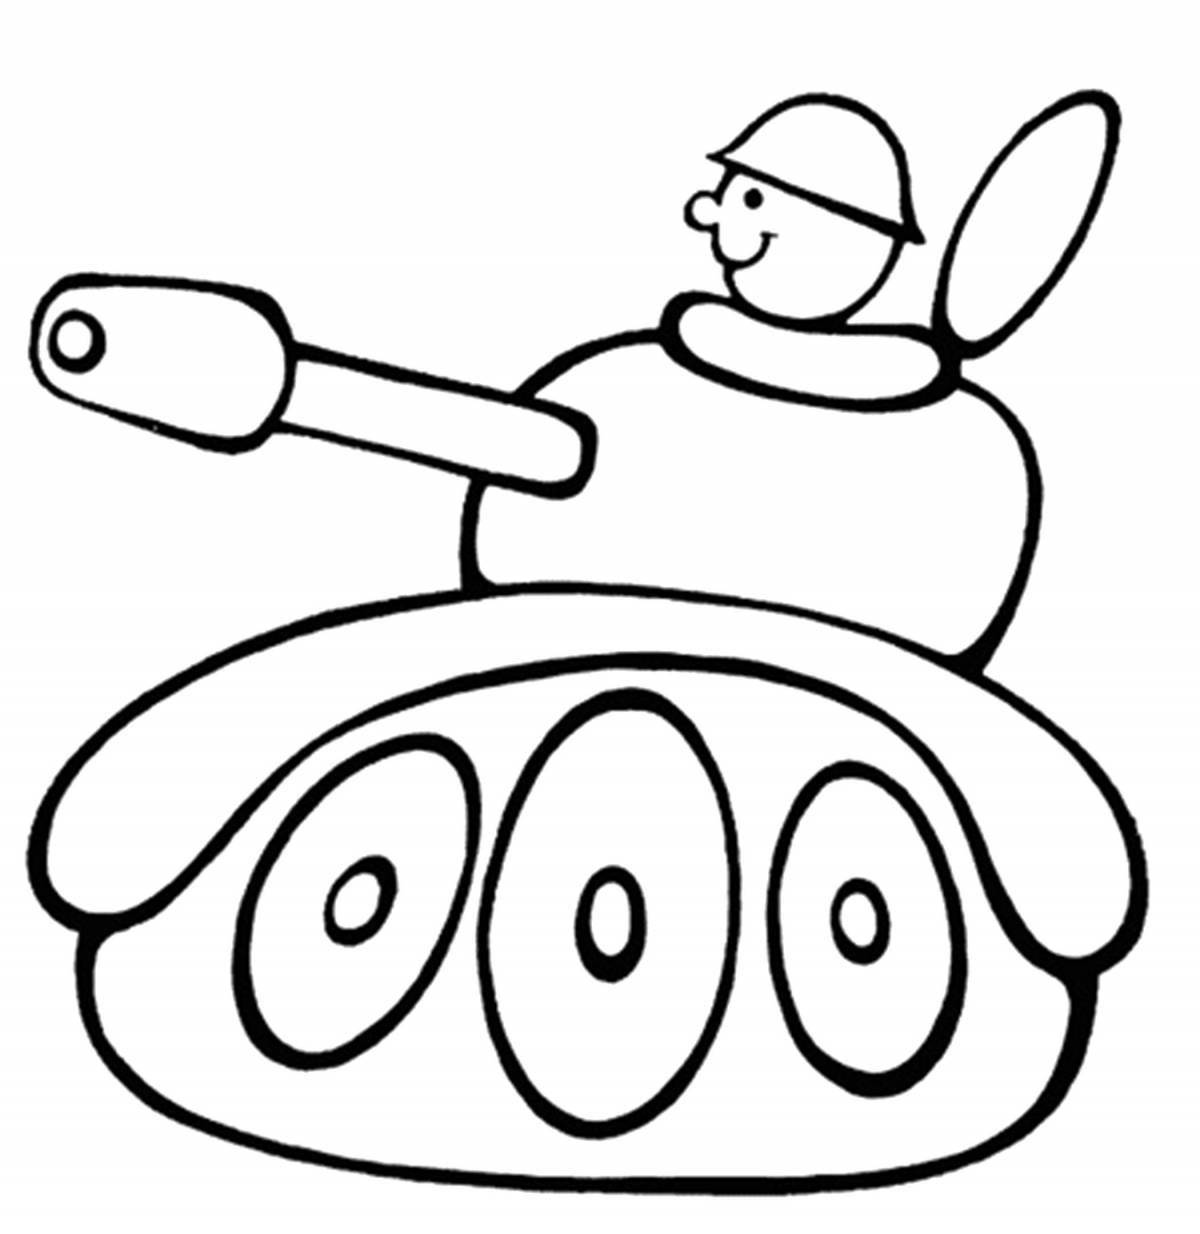 Colorful tanks coloring for kids